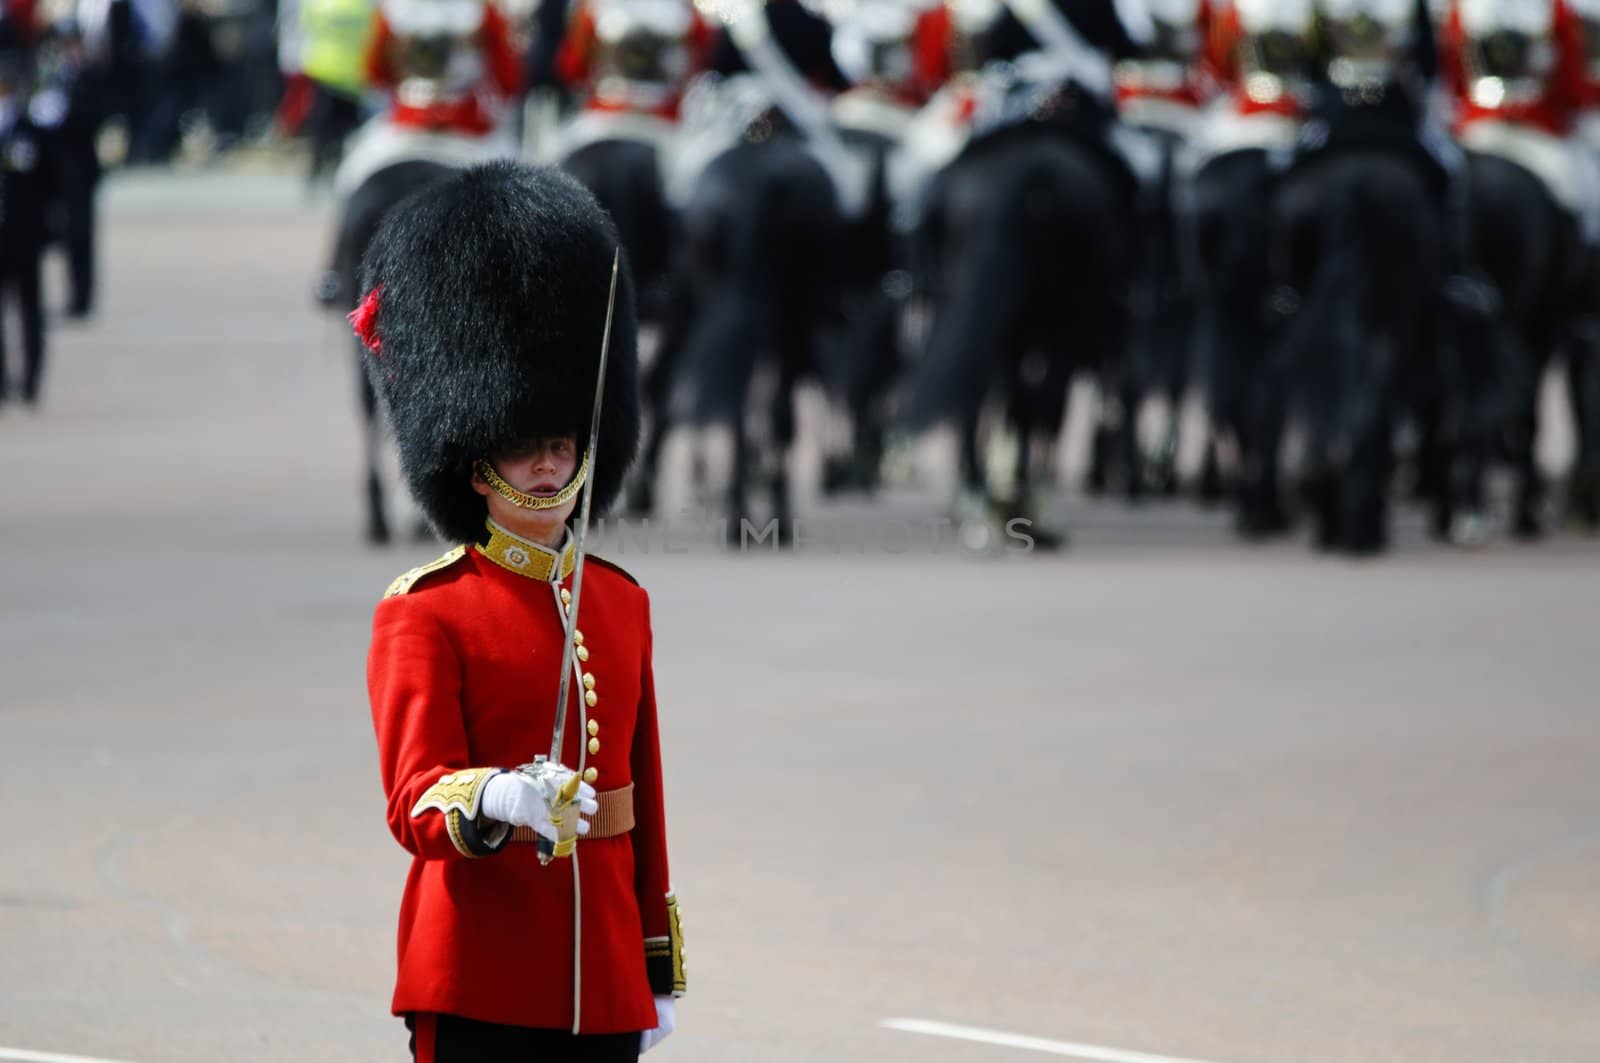 LONDON, UK - June 16: Trooping the Colour ceremony on the Mall and at Buckingham Palace, on June 16, 2012 in London. Trooping the Colour takes place every year in June to officialy celebrate the sovereign birthday.